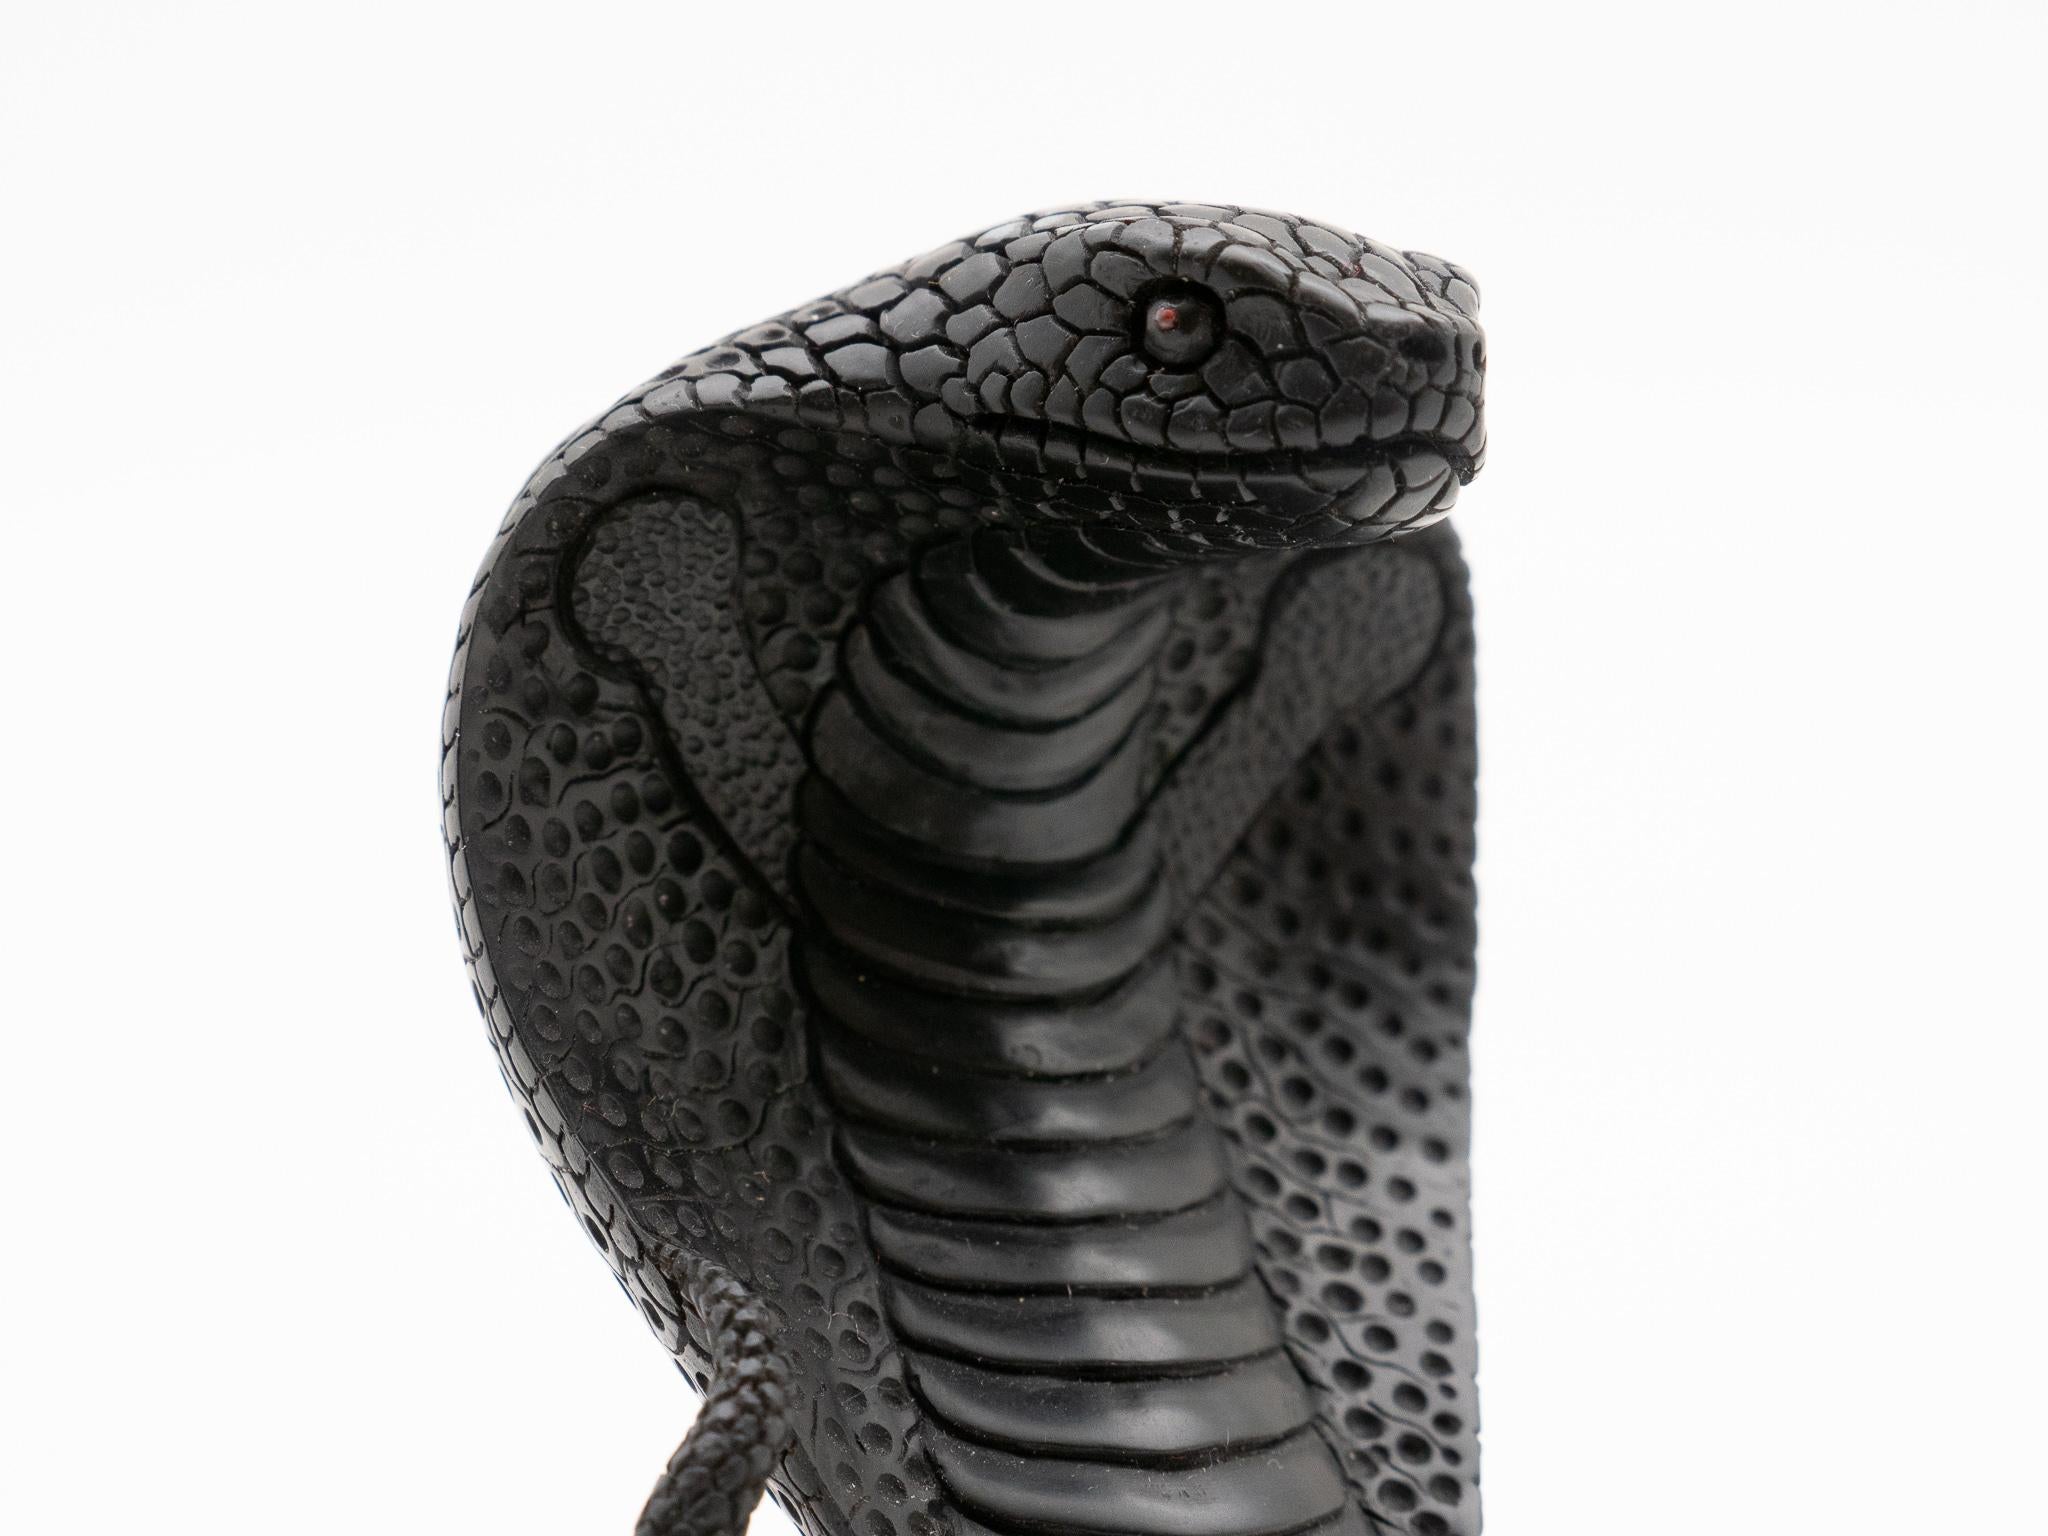 Hand-carved, highly detailed jet carving of a hooded cobra. Jet is a semiprecious gemstone produced by high-pressure decomposition of wood from millions of years ago.